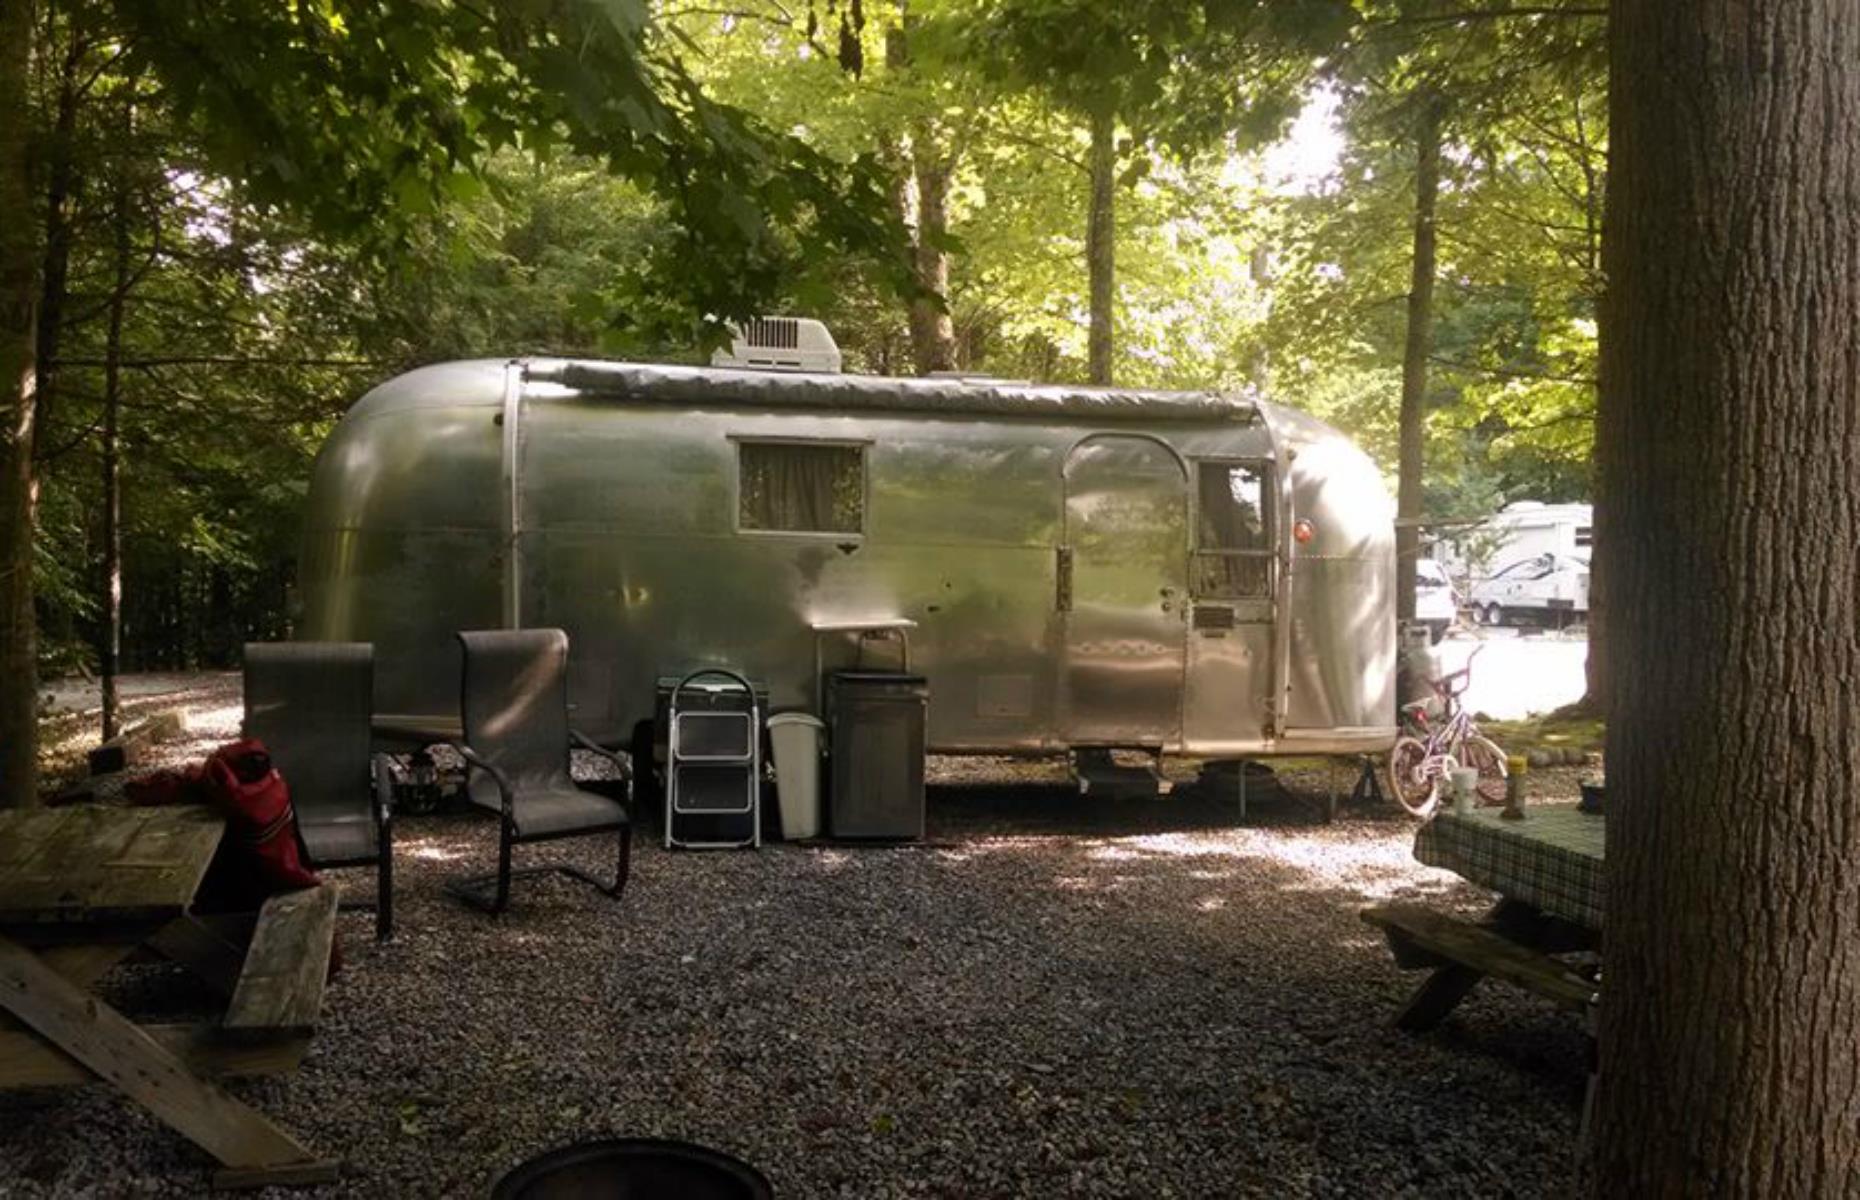 <p>The generous RV sites at <a href="https://www.smokybearcampground.com/">Smoky Bear Campground</a> in Tennessee are tucked in their own nooks and shaded by trees. So, even though it’s a relatively big site, guests can carve out their own serene slice of heaven. The spots have firepits and picnic tables, while there’s also a pool and hot tub on site (subject to social distancing measures). The clincher, though, is that the campground is right by the northeast entrance to the Great Smokies, where waterfalls, forested mountain ridges and black bears await.</p>